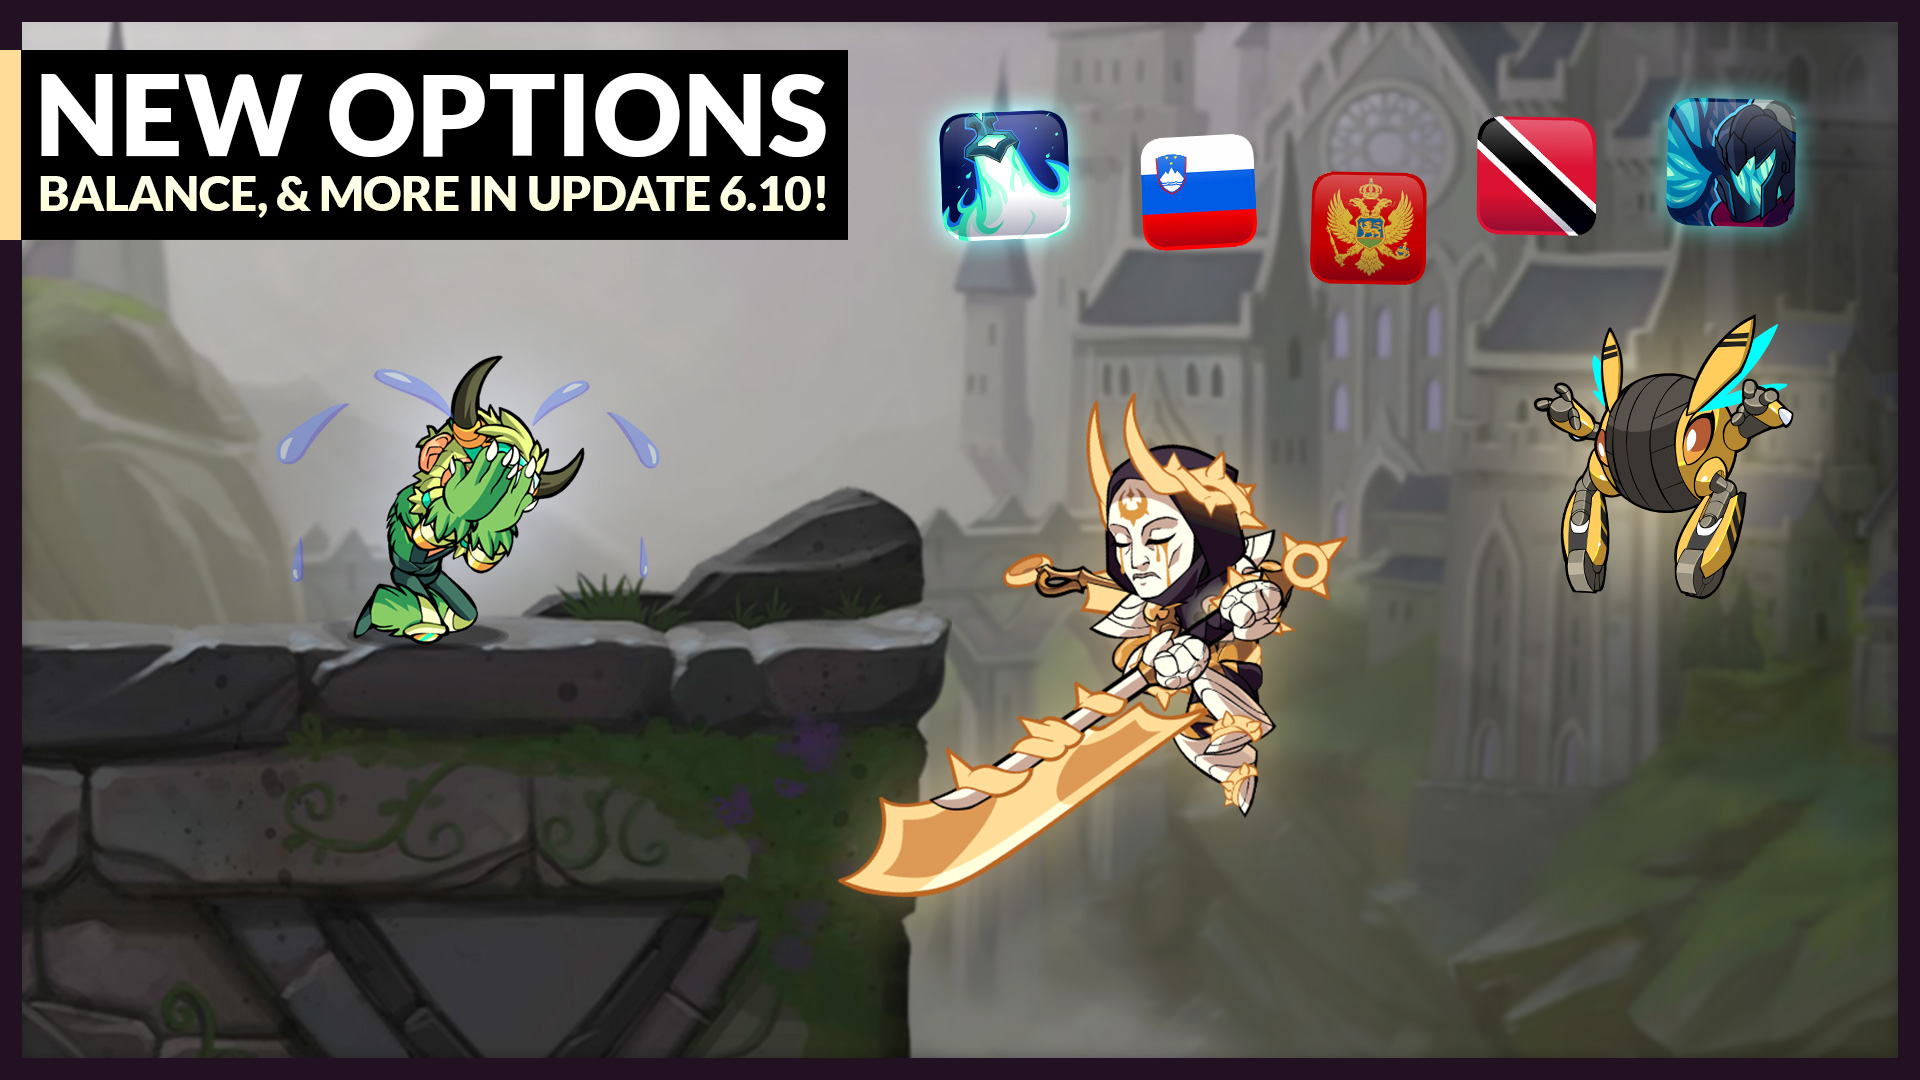 New Background Options, Balance, and Magyar Skin! &#8211; Patch 6.10